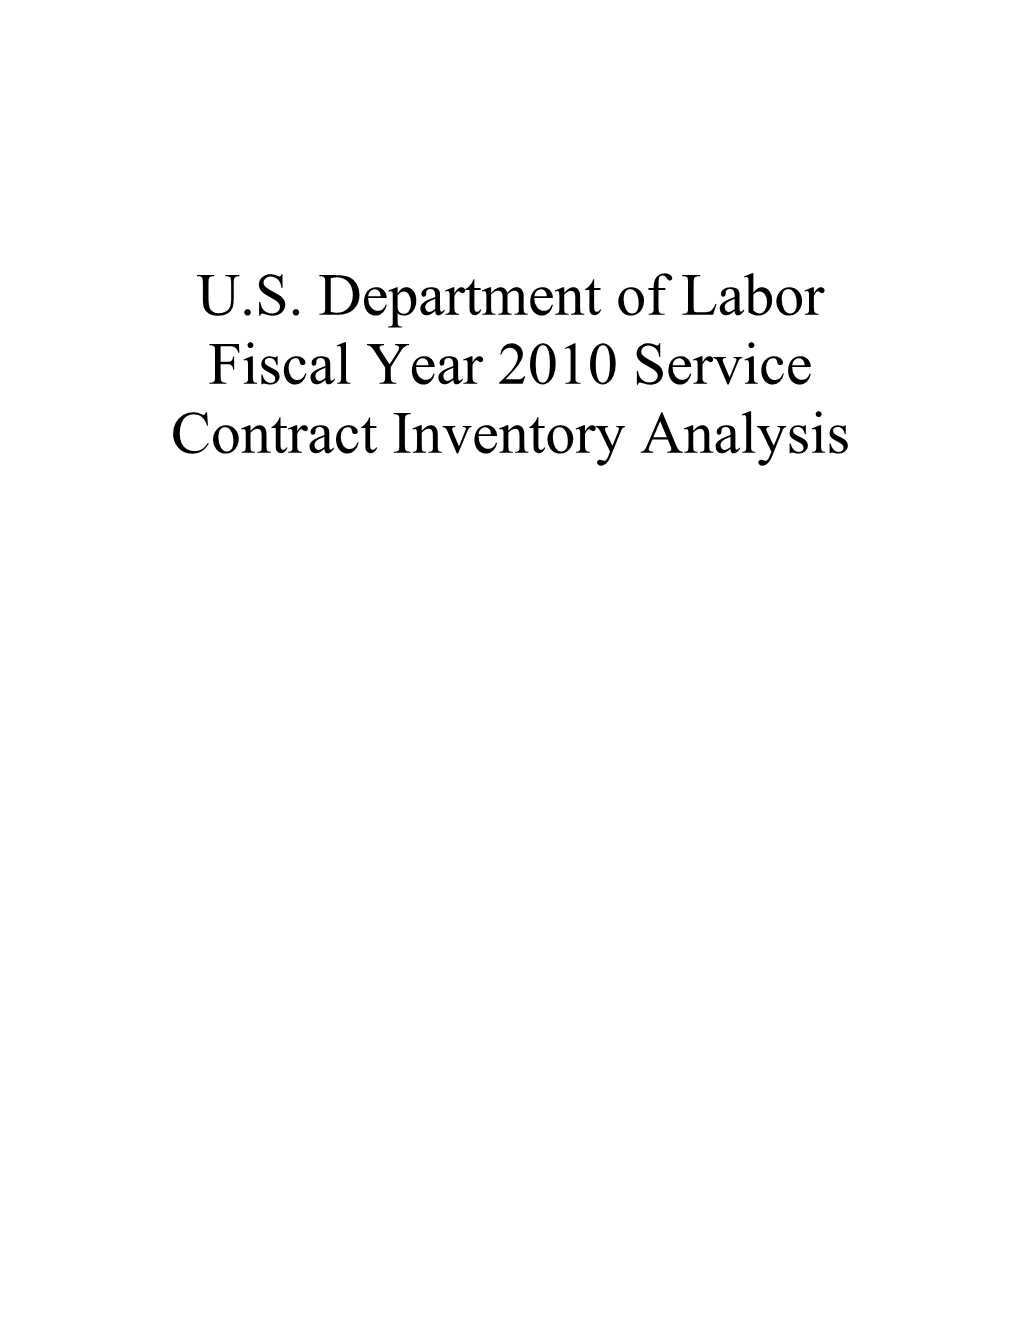 Fiscal Year 2010 Service Contract Inventoryanalysis